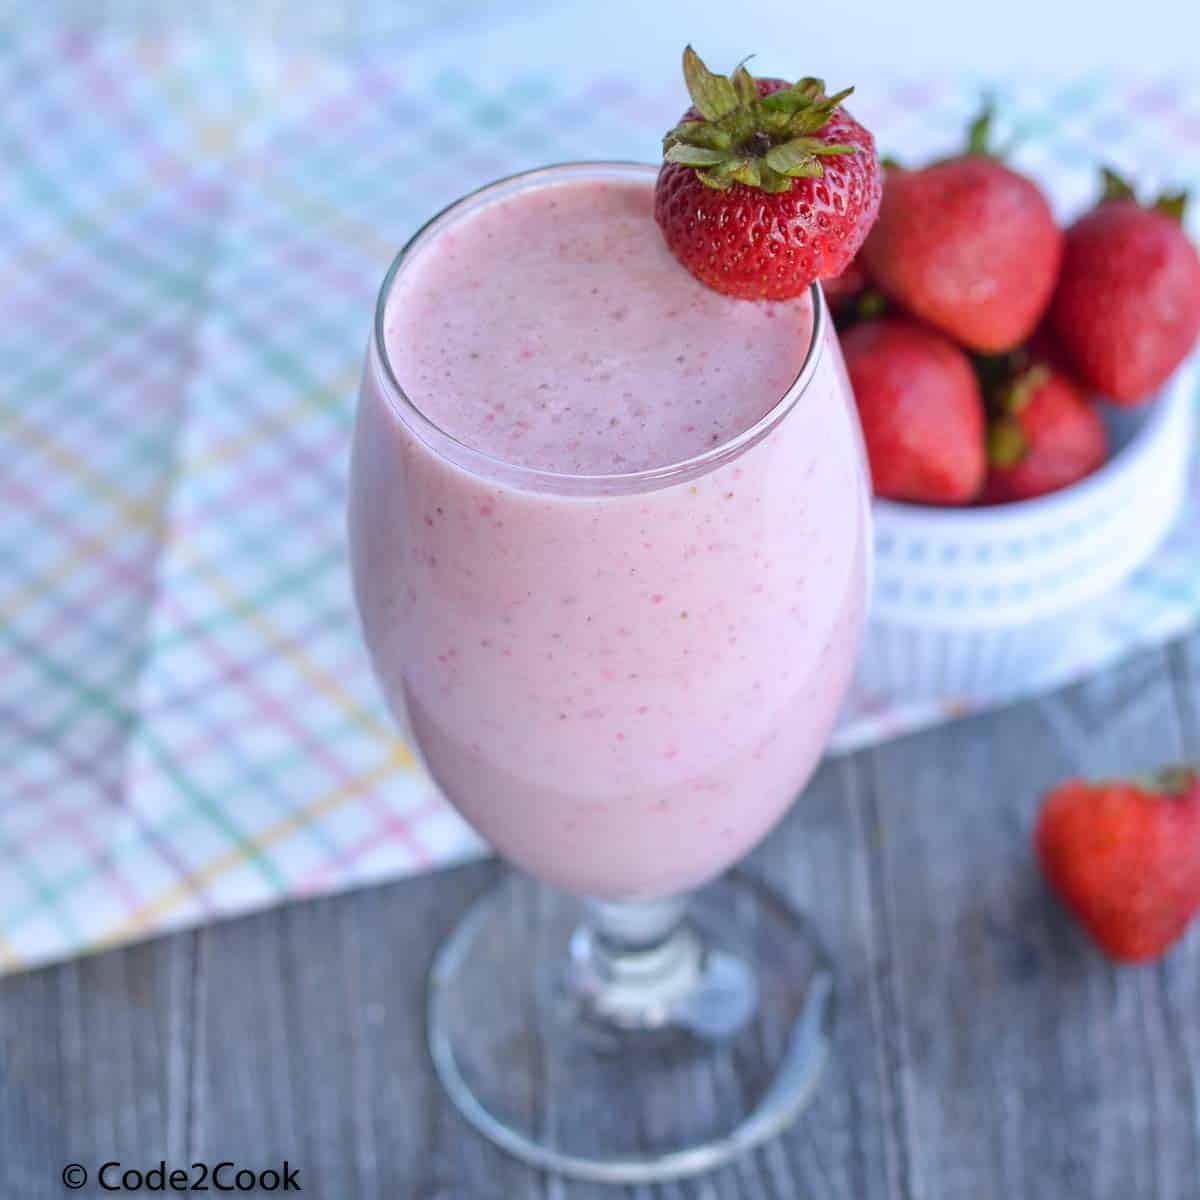 A close click of strawberry milkshake, strawberries lying behind the glass.